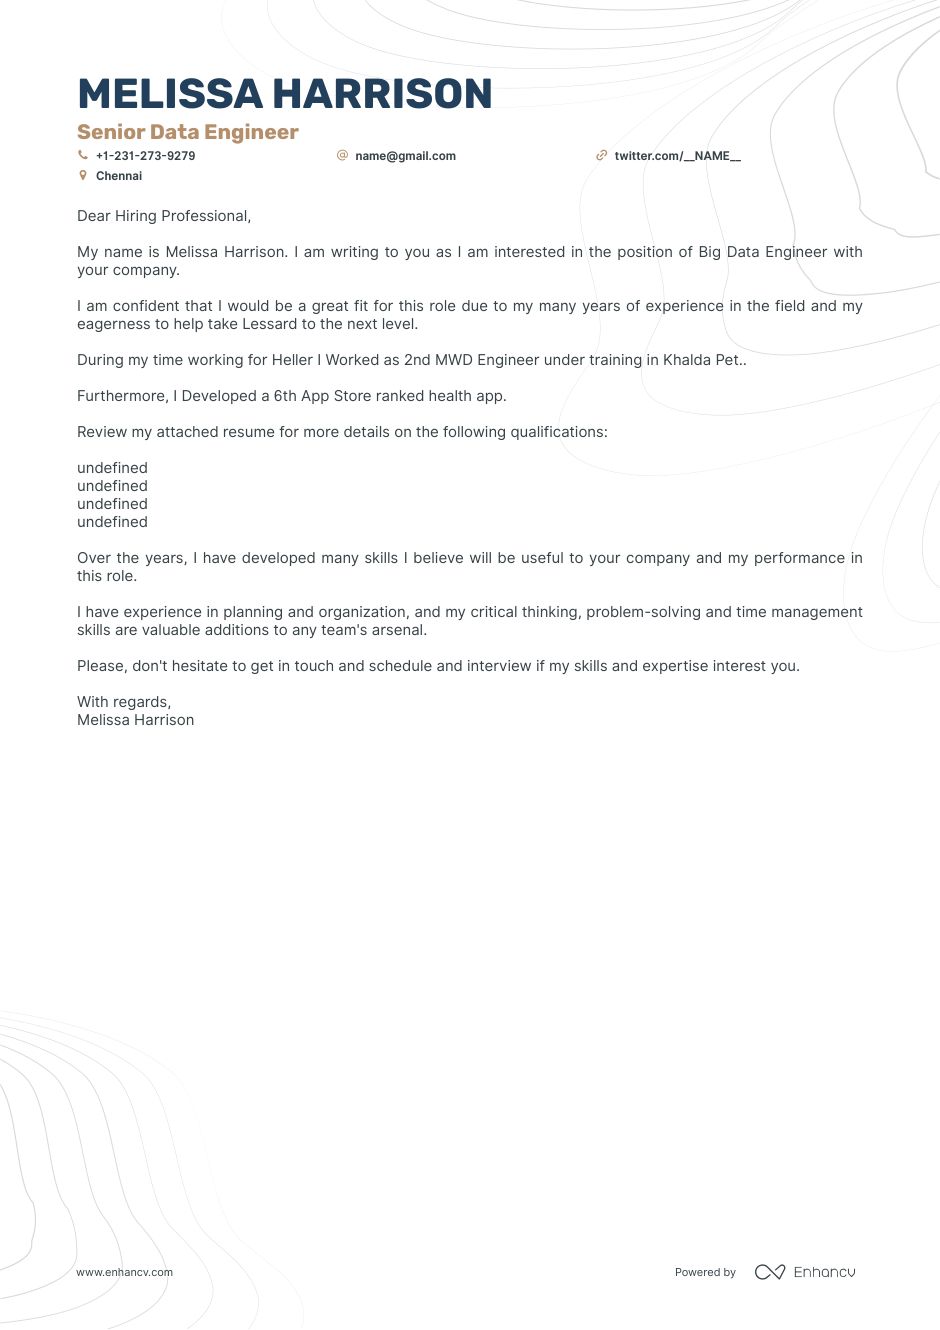 big-data-engineer-coverletter.png